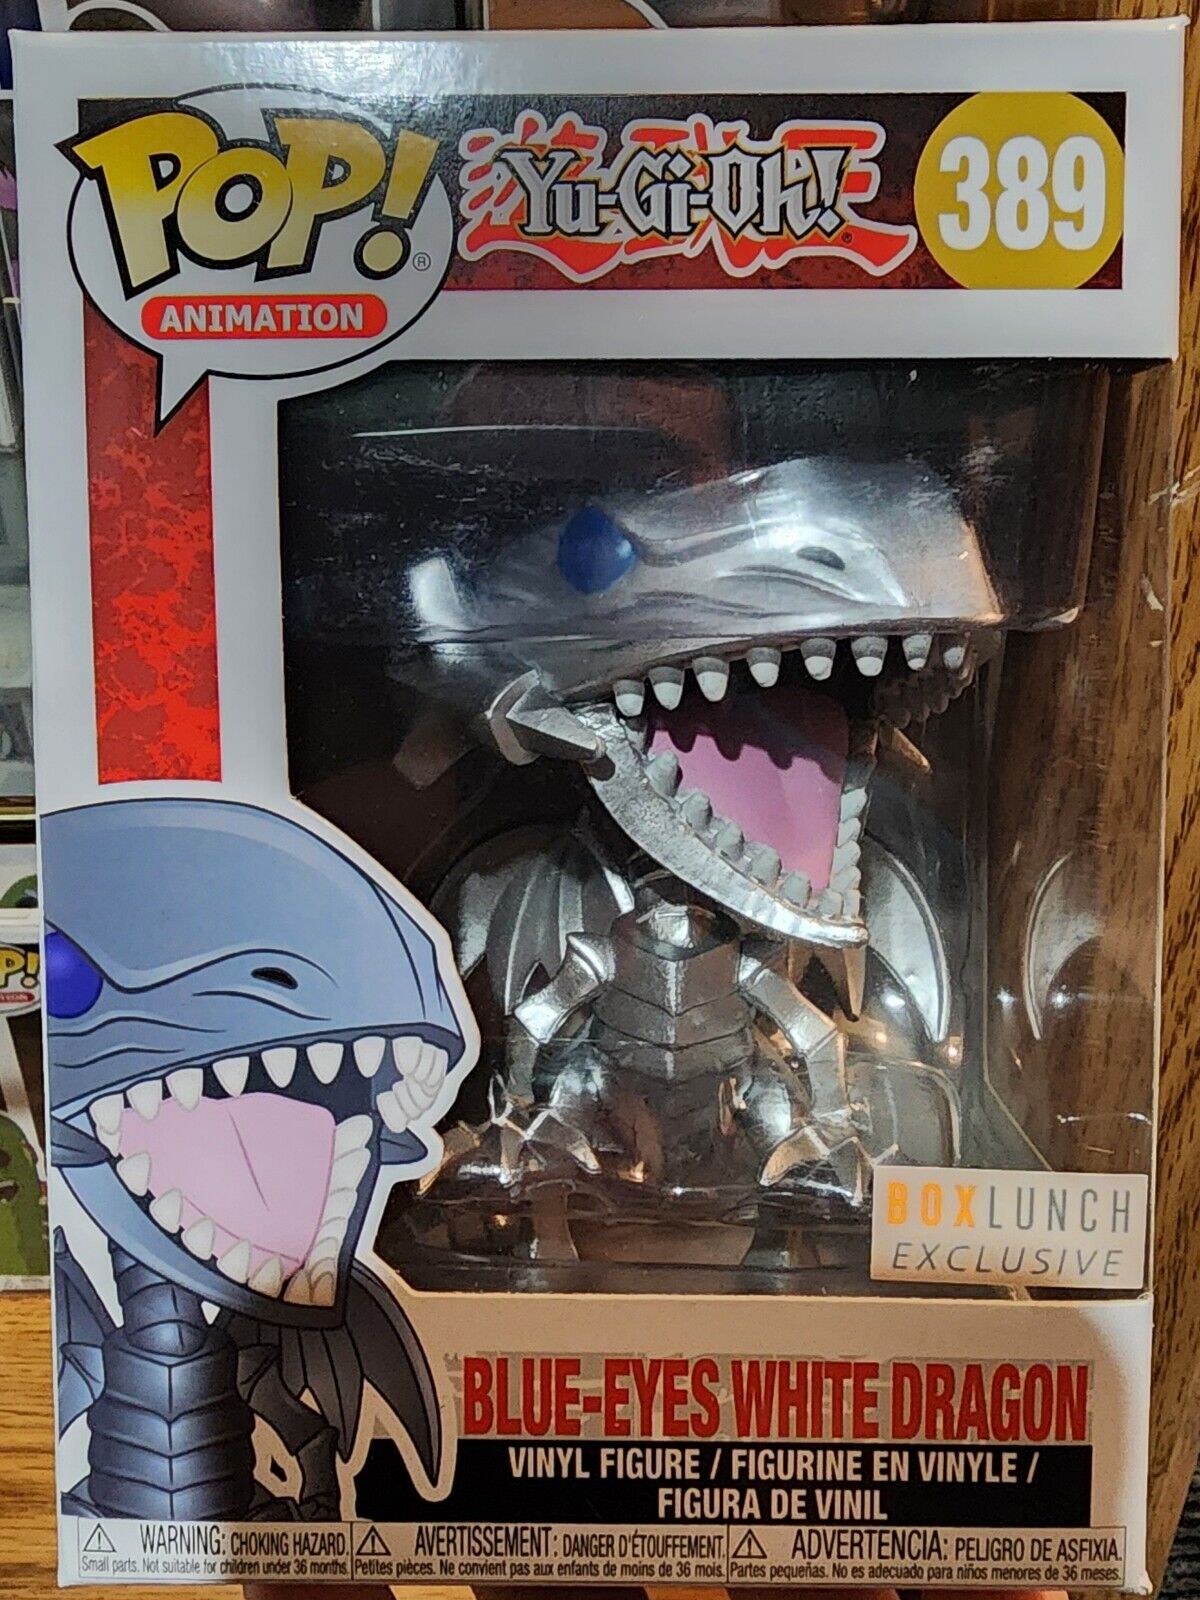 Funko Pop Yu-Gi-Oh Blue-Eyes White Dragon Box Lunch Exclusive #389 Vaulted NM